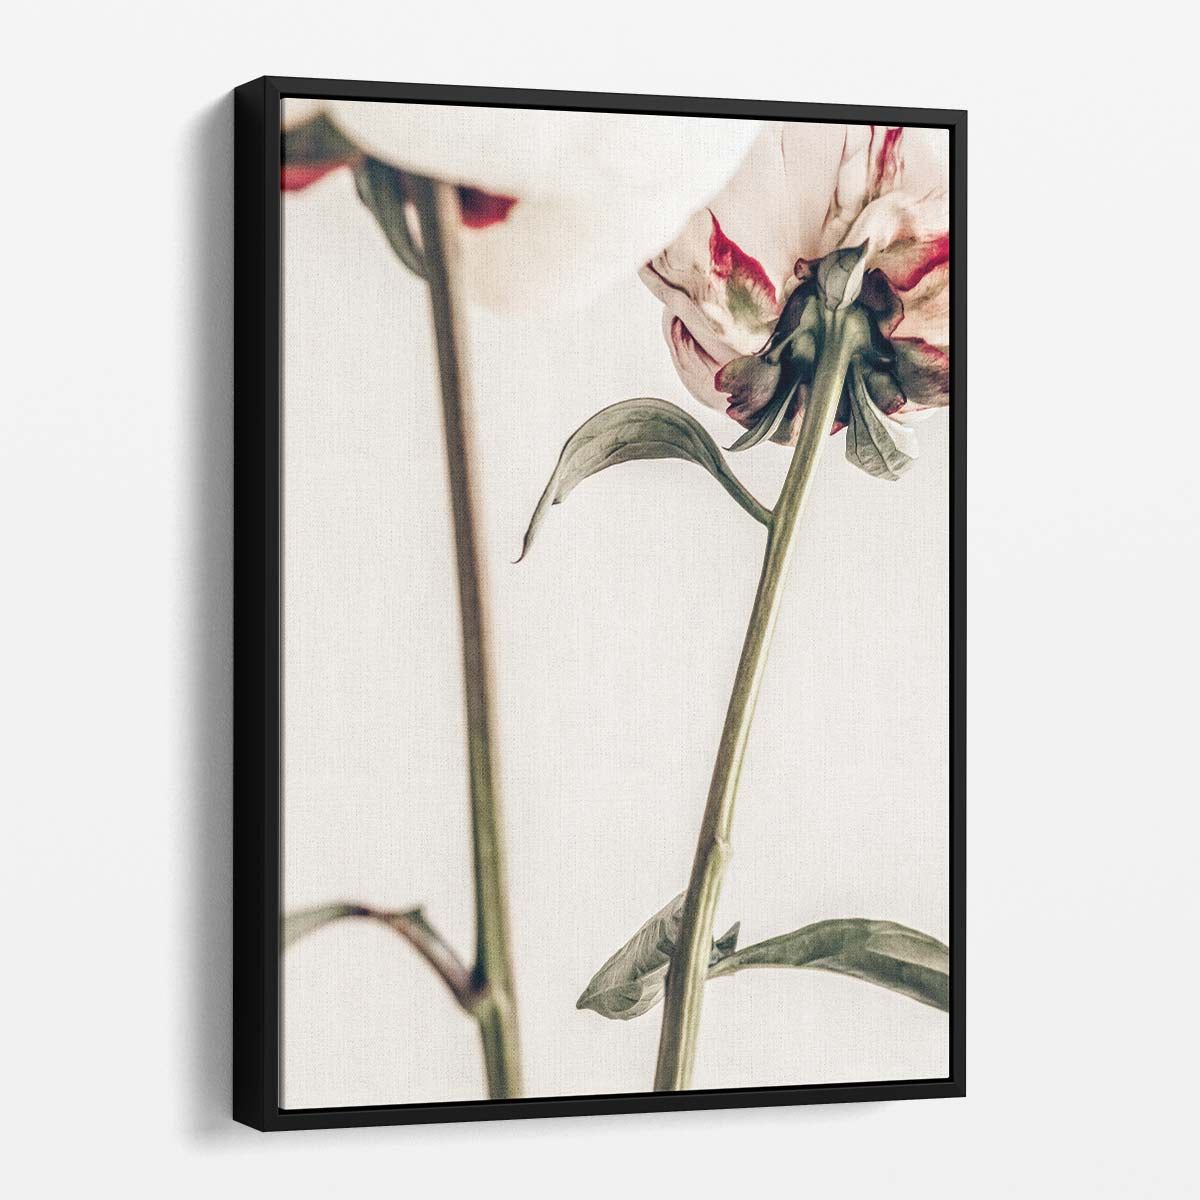 Botanical Pink Peony Photography - Floral Still Life Wall Art by Luxuriance Designs, made in USA